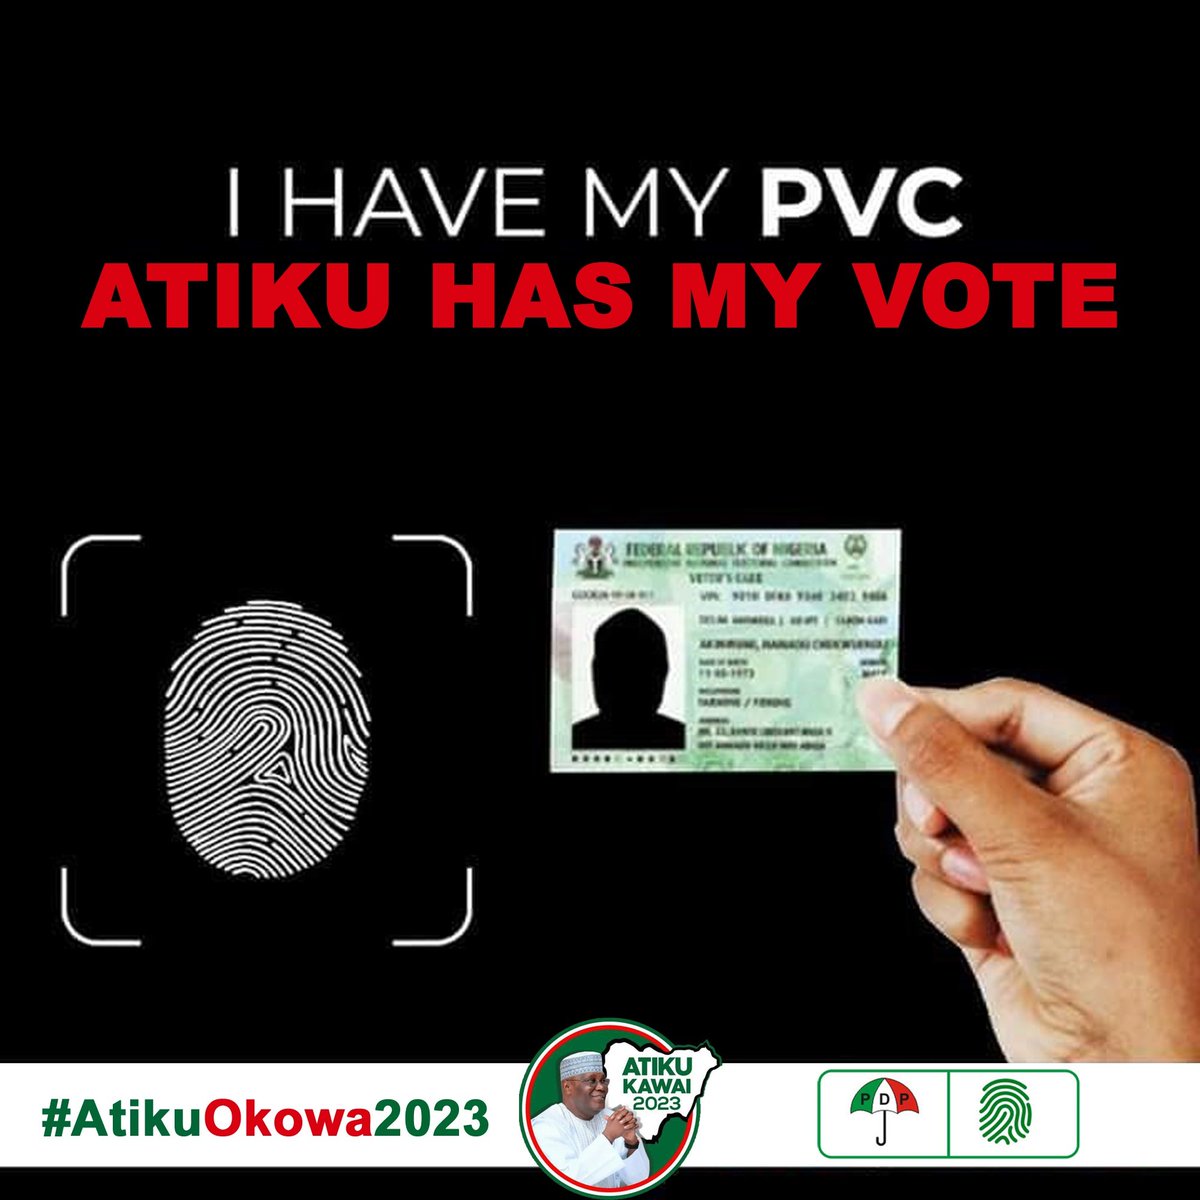 I hereby declare my vote to #AtikuOkowa on 25th Feb, 2023

WHAT ABOUT YOU?